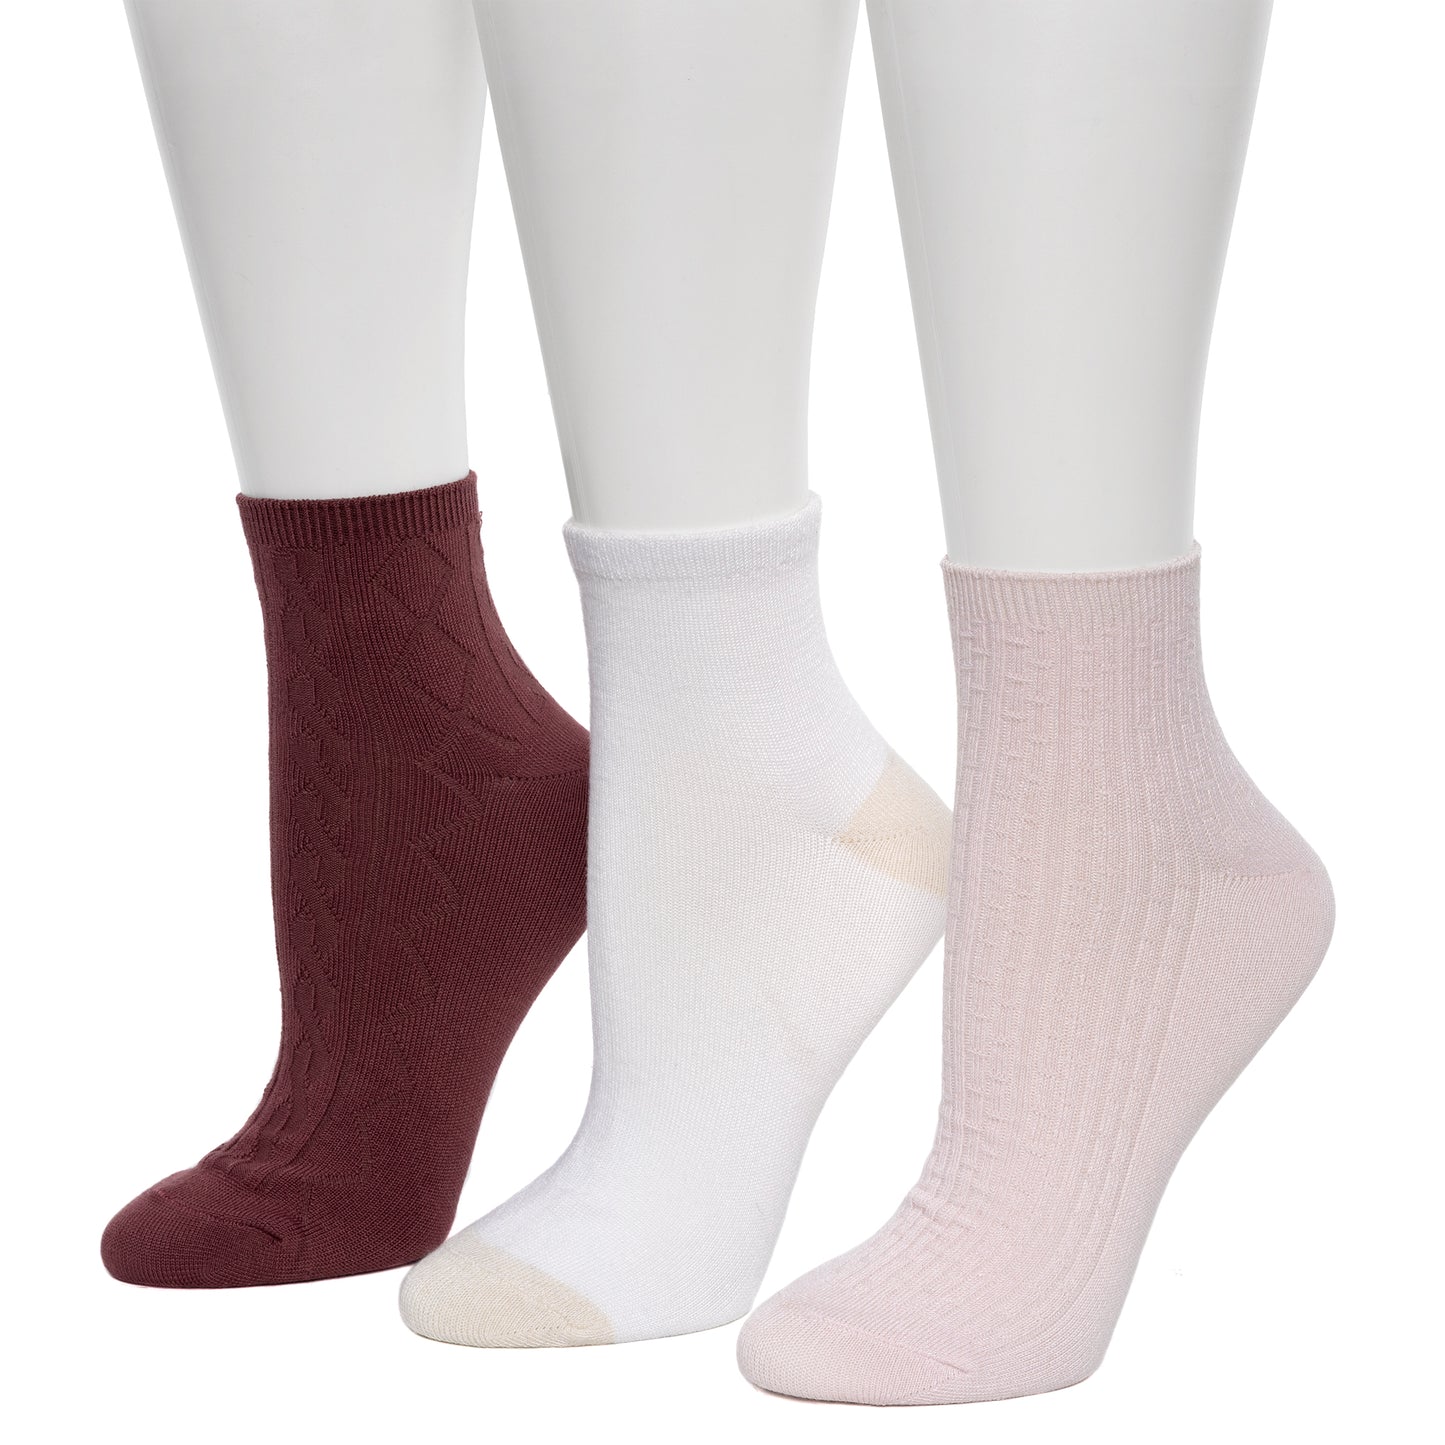 Rosewater;@Vertical Texture Anklet Sock 3 Pack Media 1 of 2